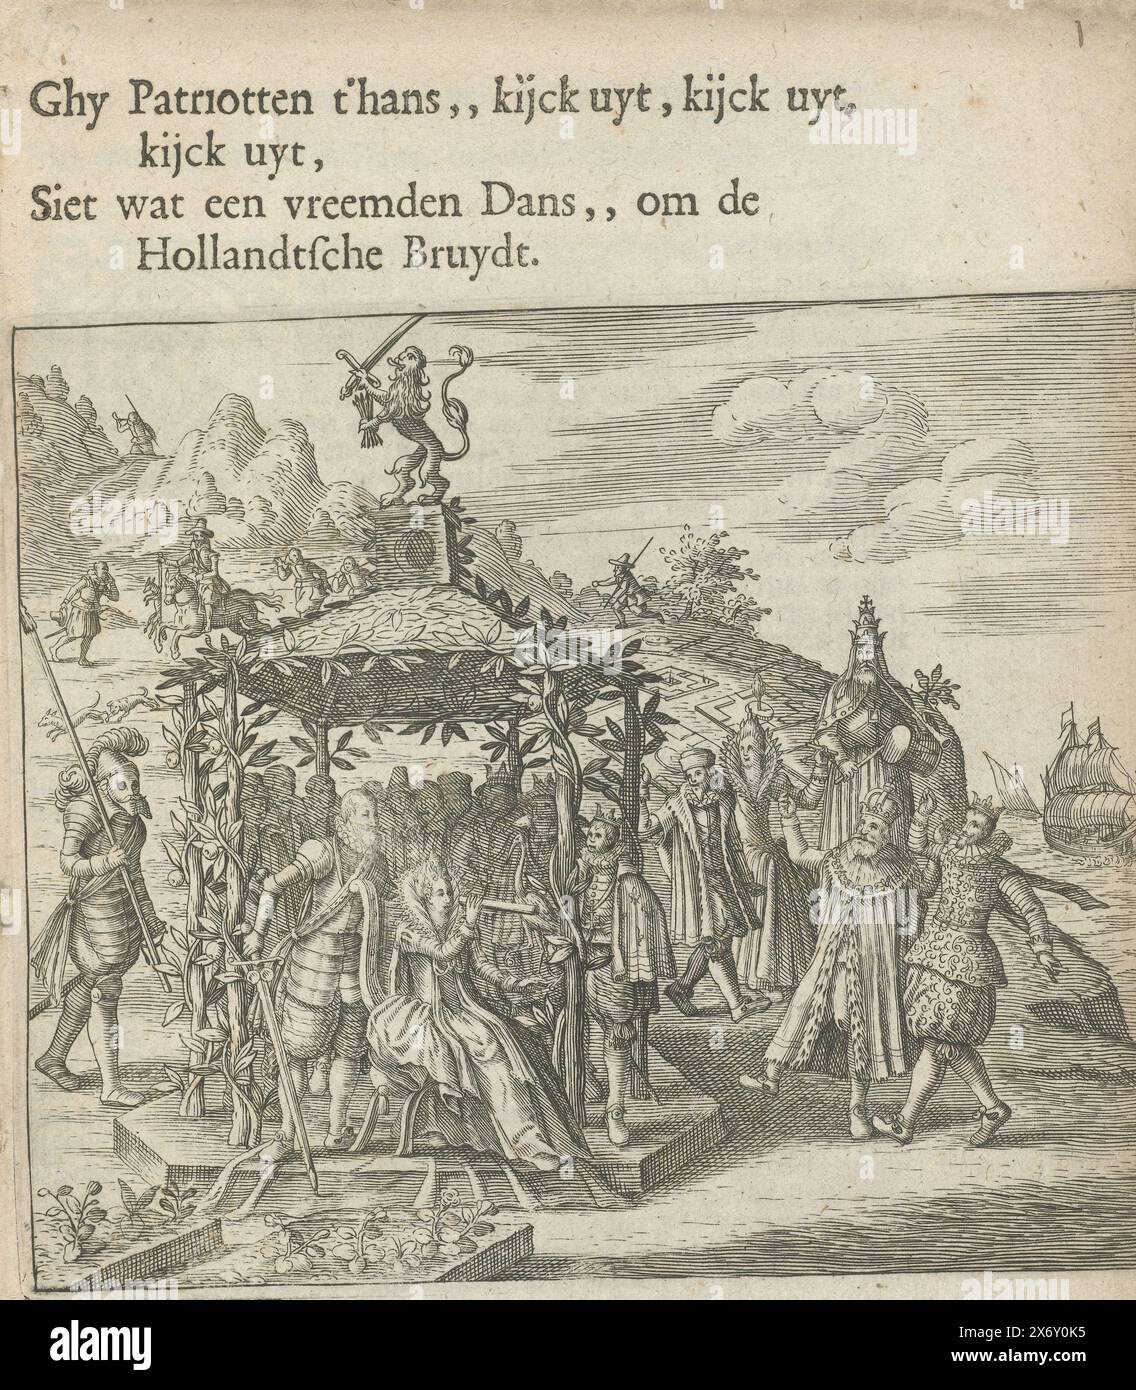 Title page of the pamphlet Ghy Patriotten t'hans, kijck uyt, kijck uyt, kijck uyt, Siet wat een strange Dans, om de Hollandtsche Bruydt, 1615, Title page of the pamphlet Ghy Patriotten t'hans, kijck uyt, kijck uyt, kijck uyt, Siet what a strange Dance, om de Hollandtsche Bruydt, 1615. Allegory on the situation in the Netherlands in the year 1615 with a call to remain vigilant. The Dutch Virgin (Belgica) sits in a bower decorated with vines on which apples (of Orange) grow. She has binoculars in one hand and a crane in the other. Behind her stands Prince Maurits with his sword drawn. On the Stock Photo